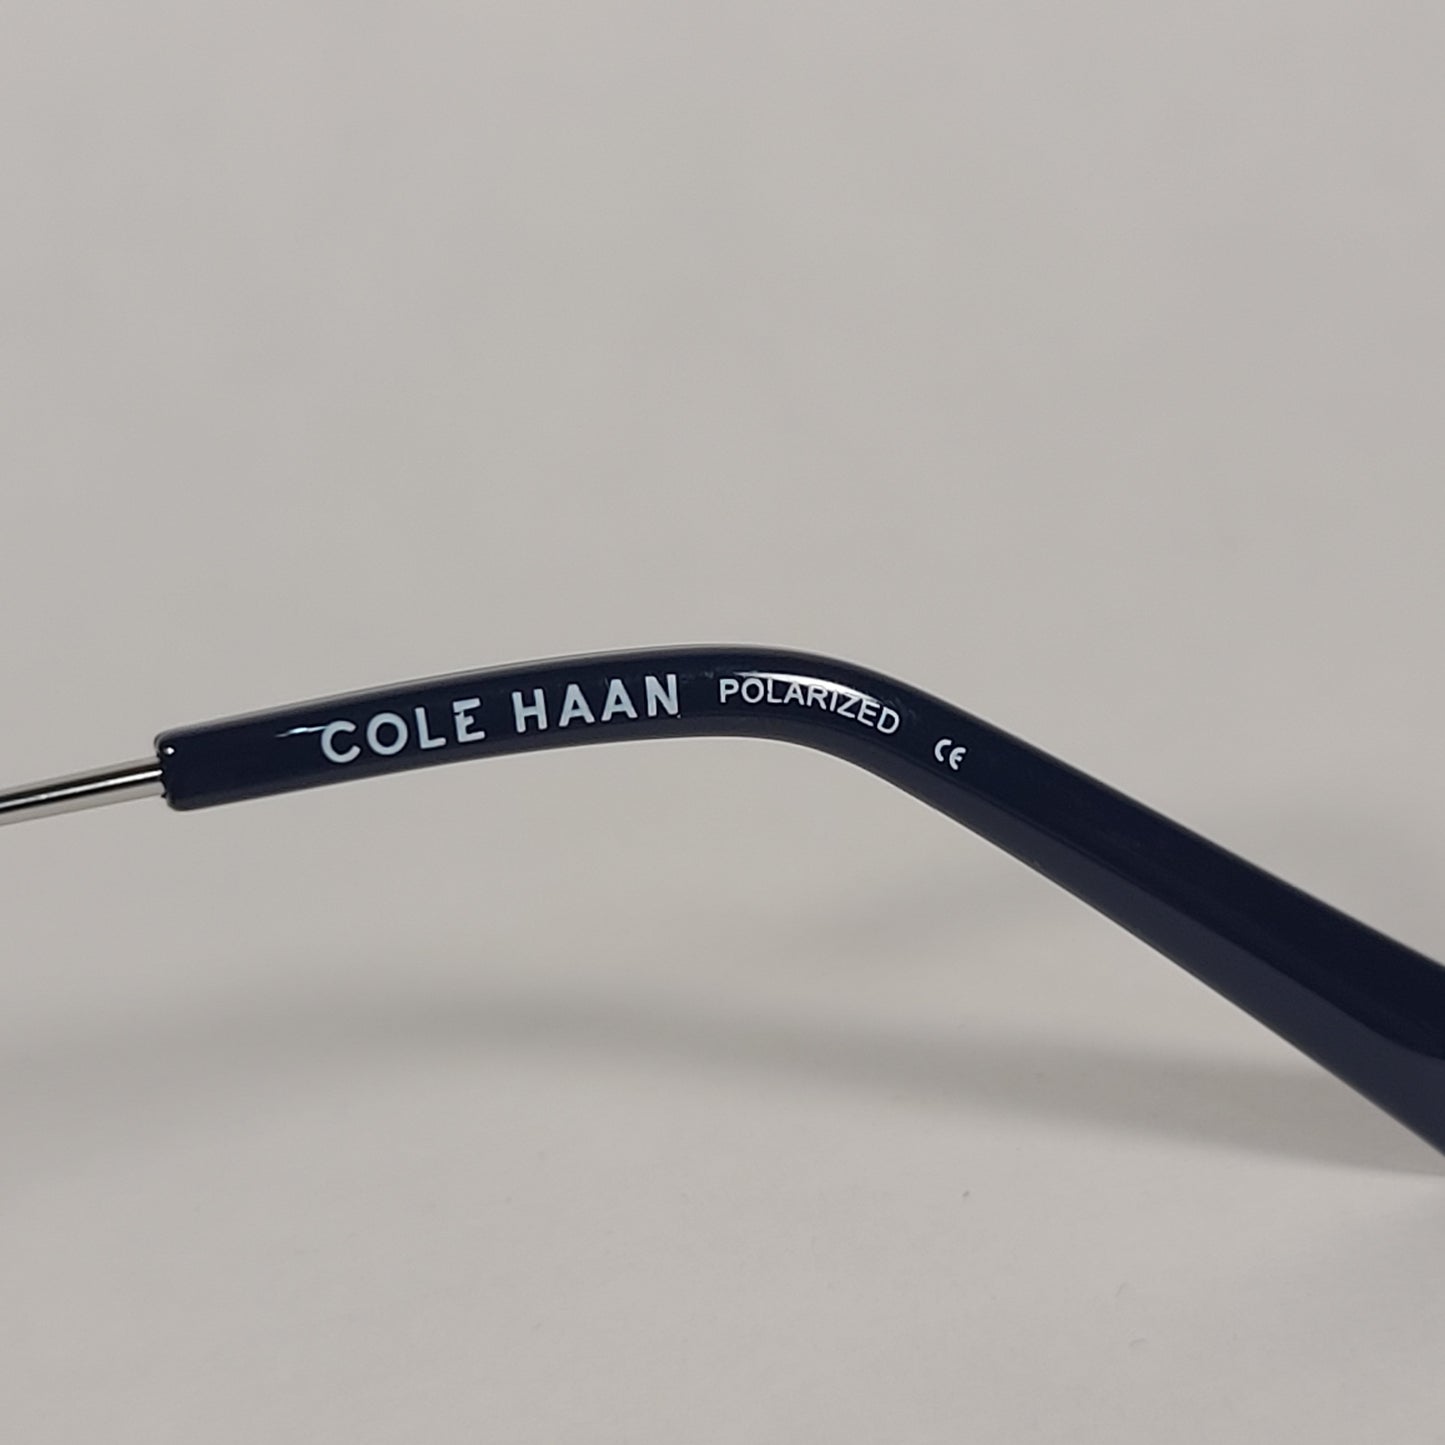 Cole Haan CH8010 414 Polarized Club Sunglasses Navy Blue And Silver Frame Gray Lens - Sunglasses